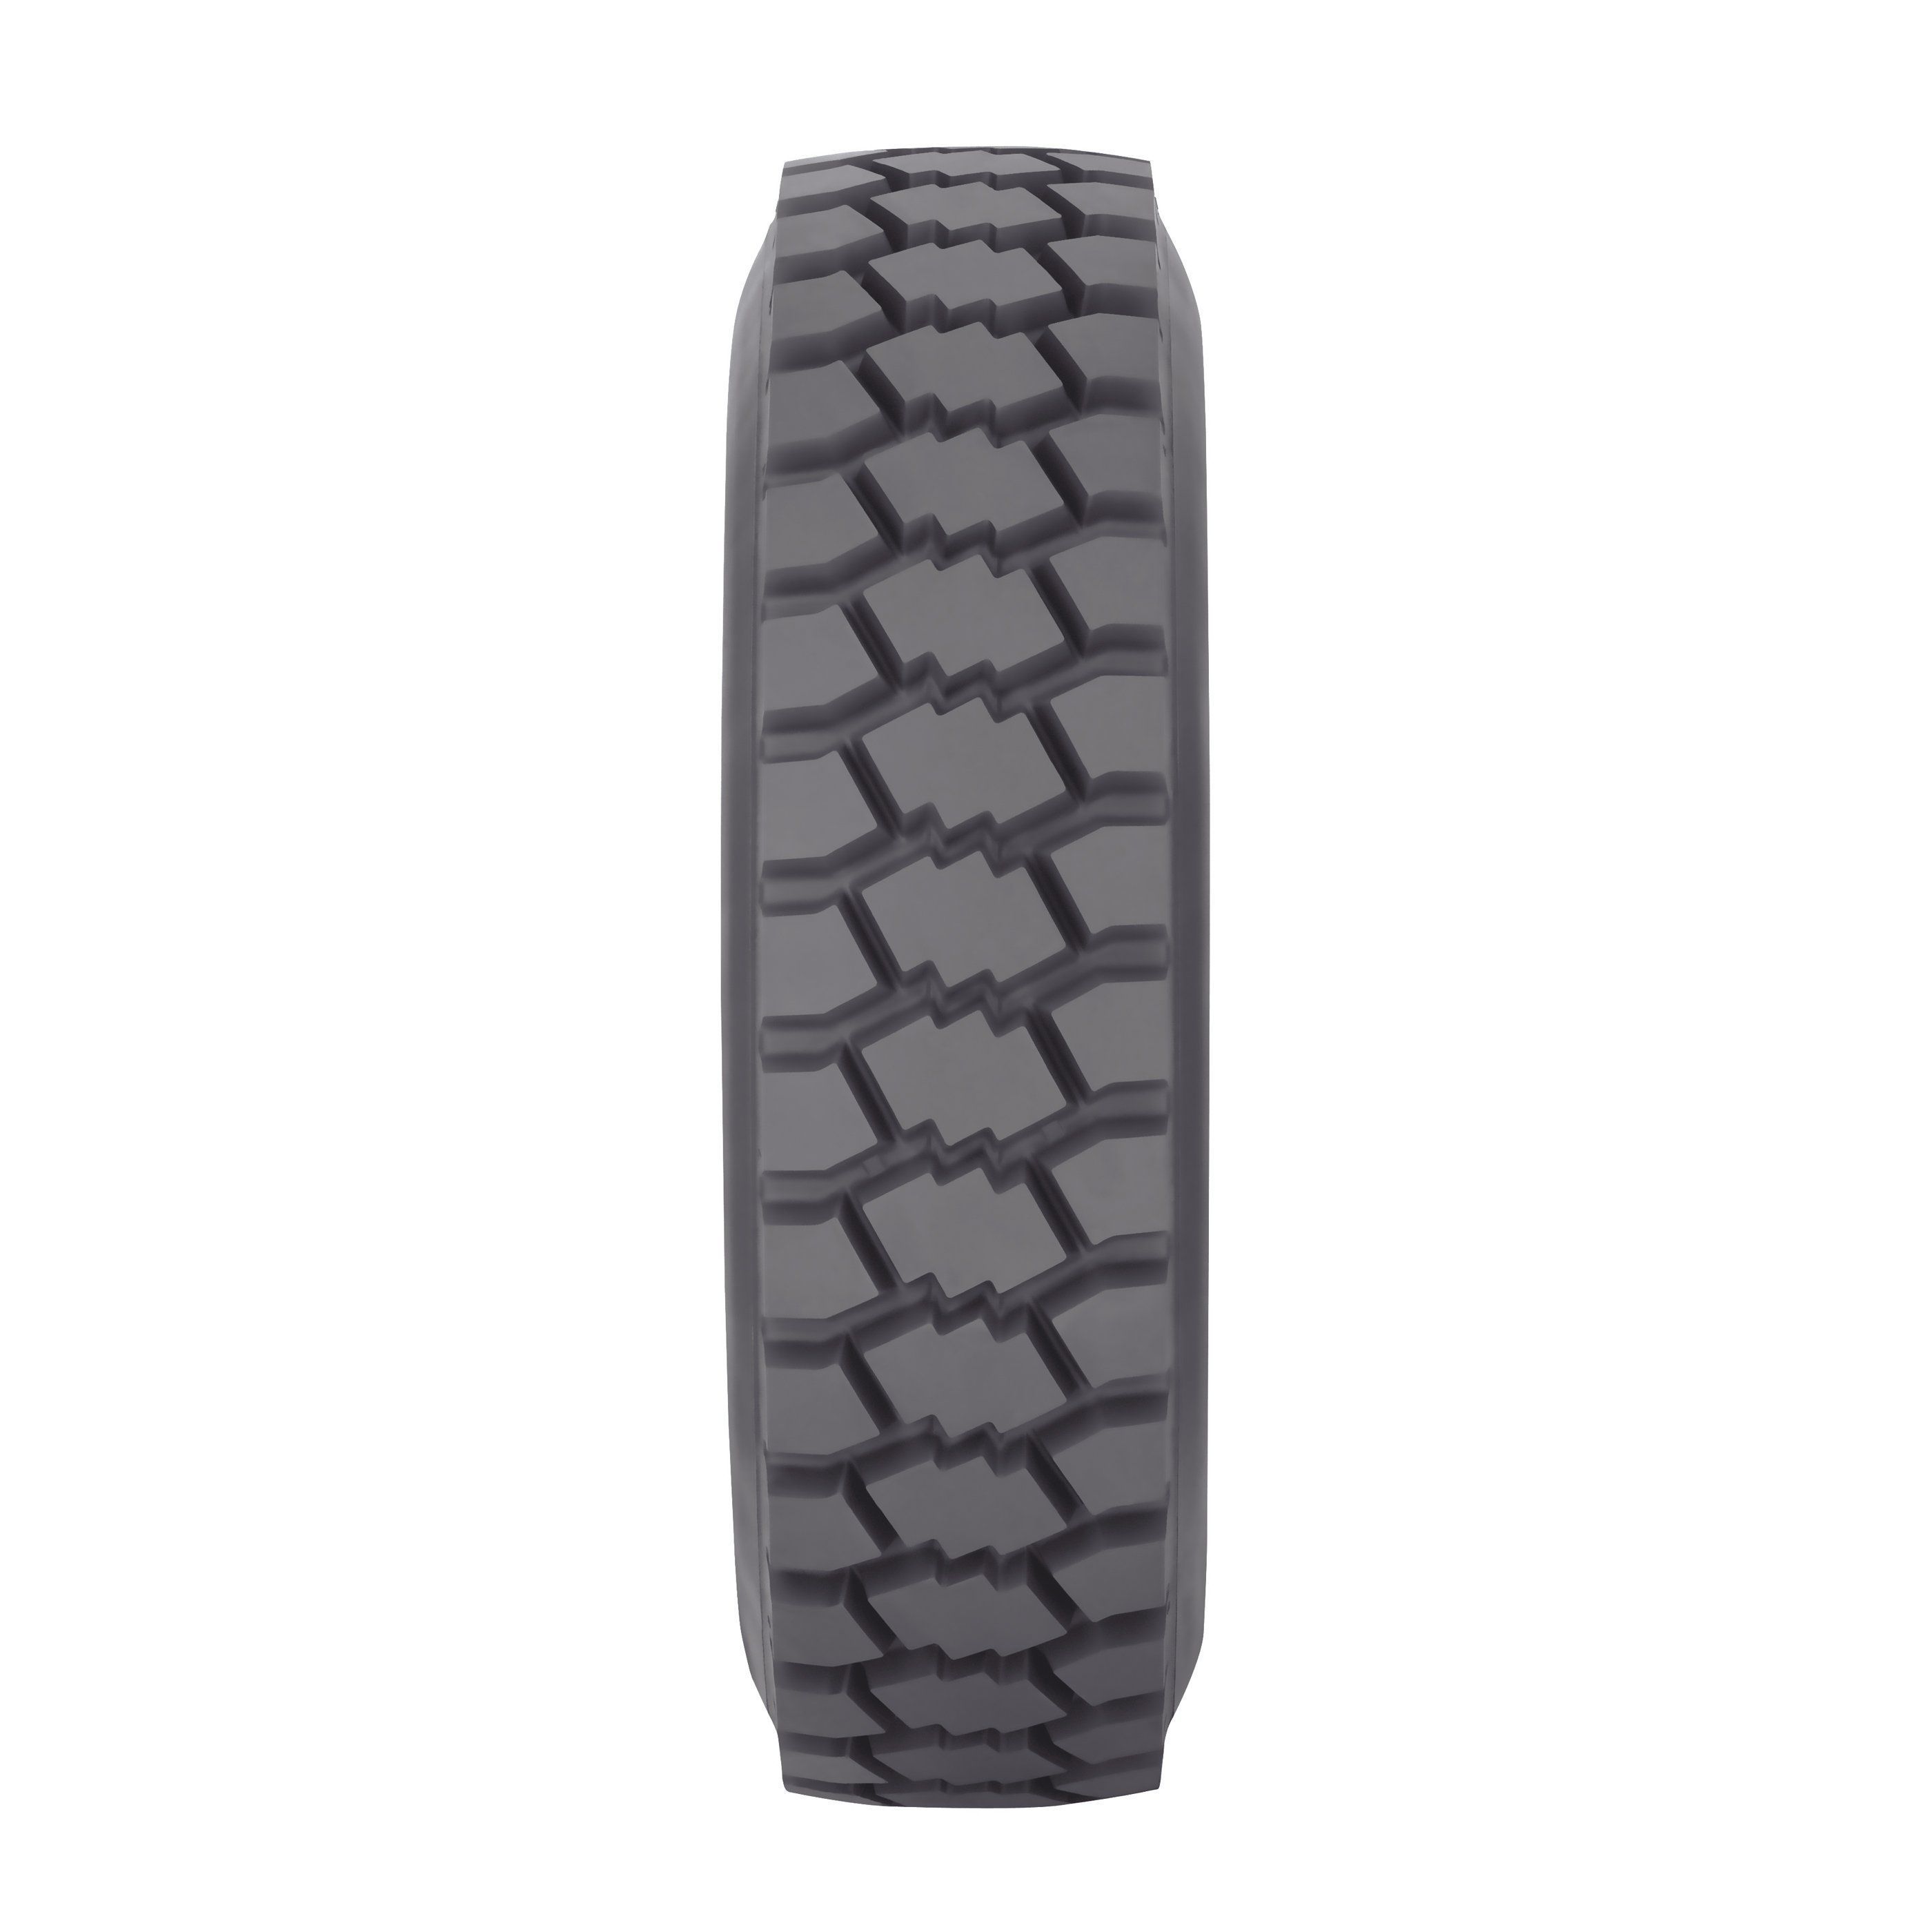 King o. A. reccomend Tire penetration barrier